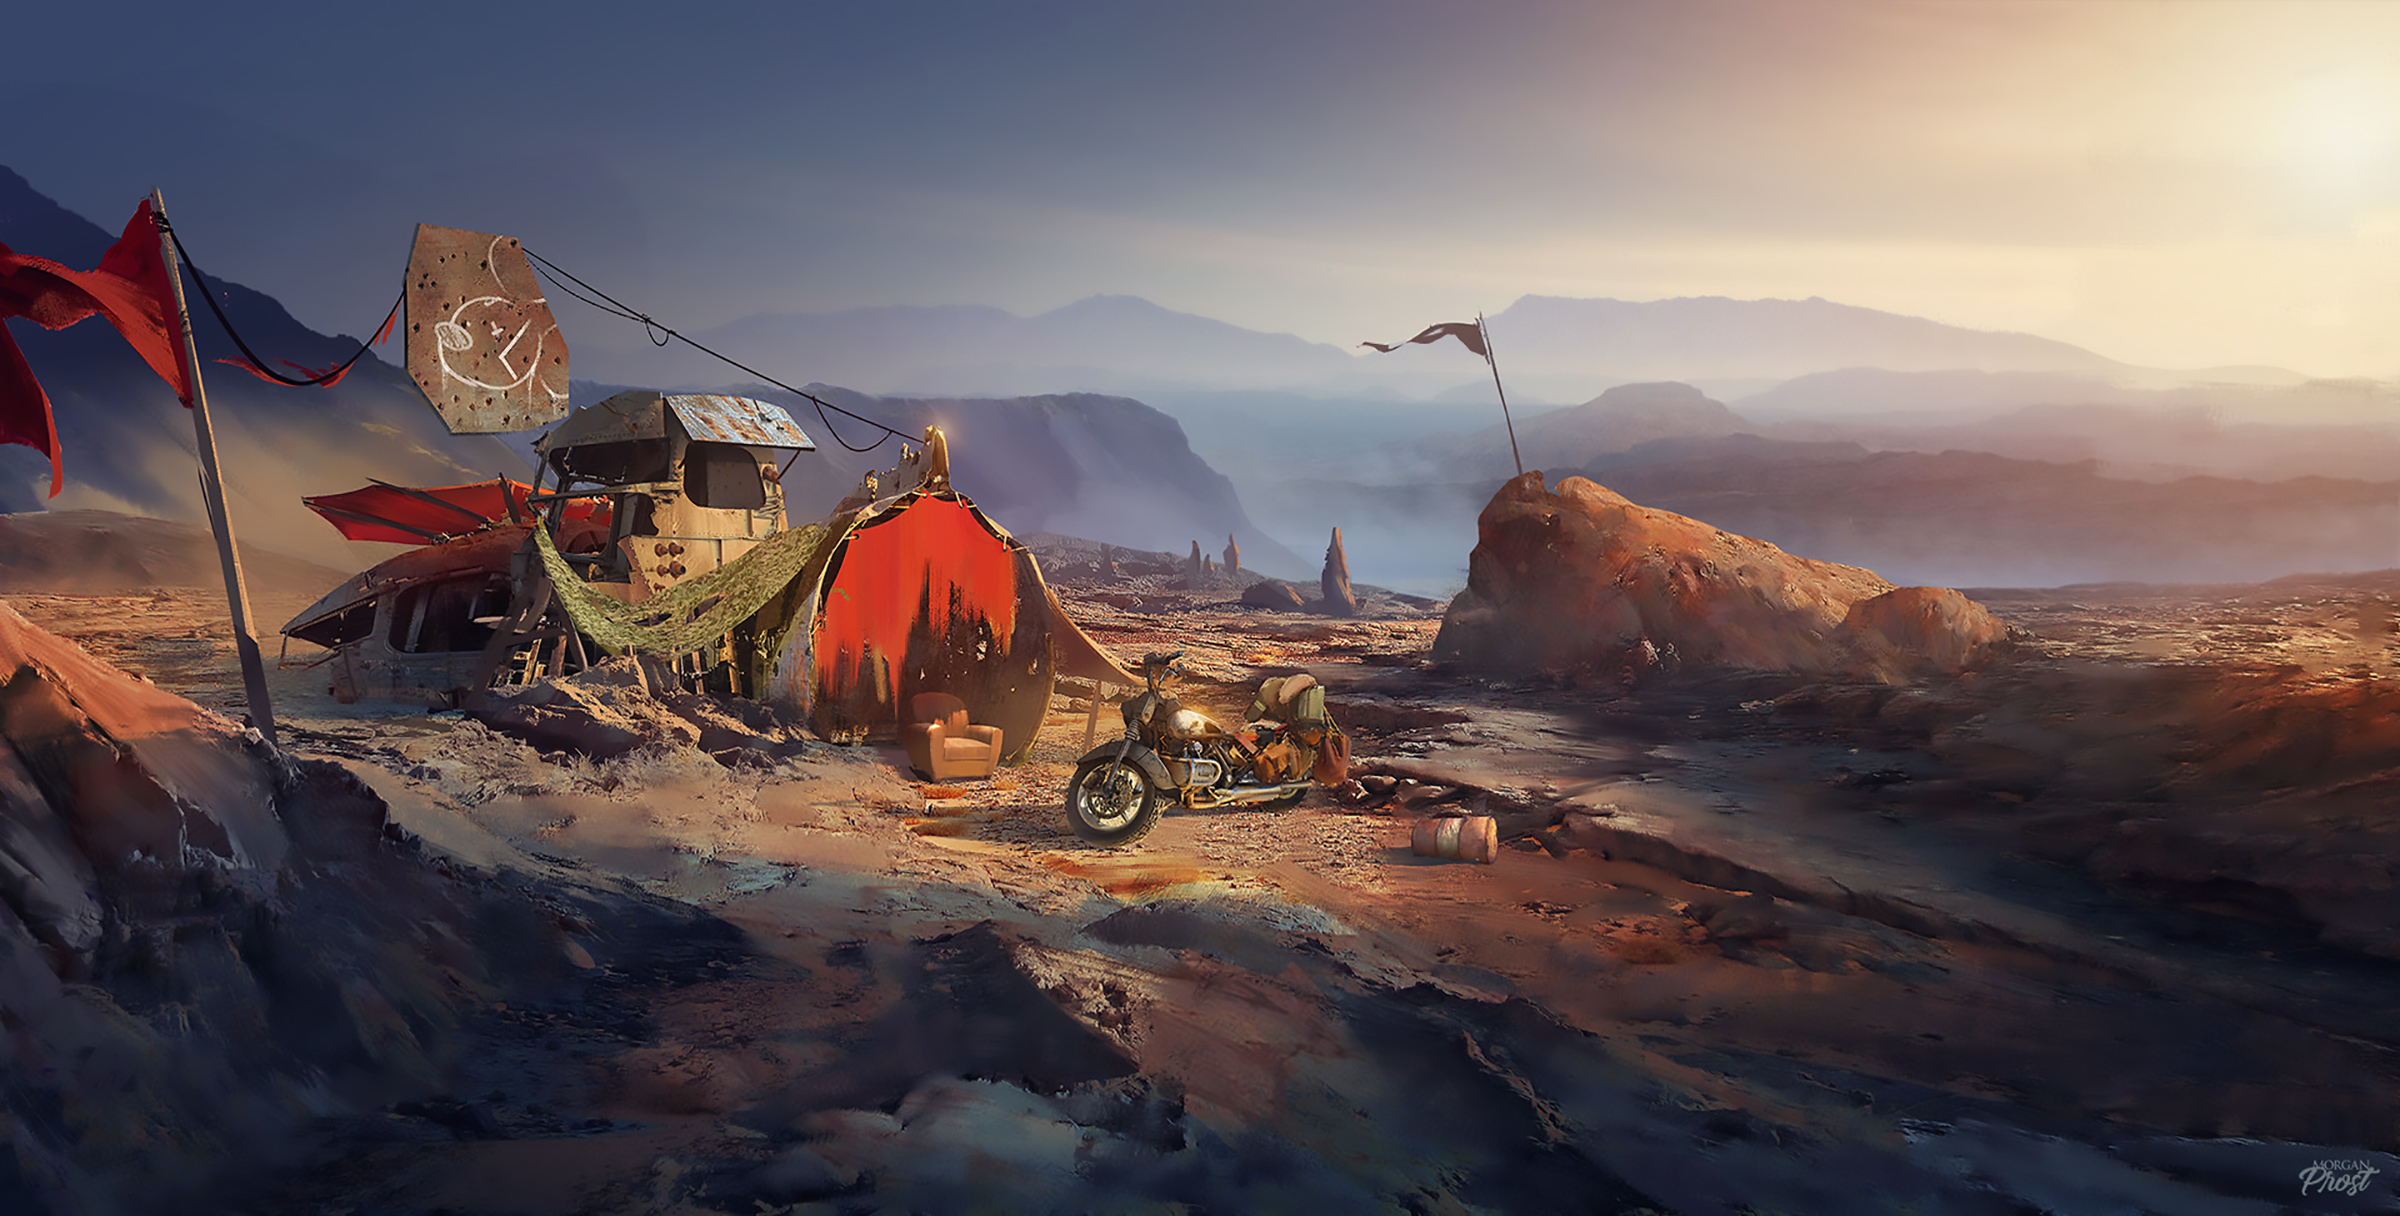 Camp Motorcycle Mountain Post Apocalyptic 2400x1216